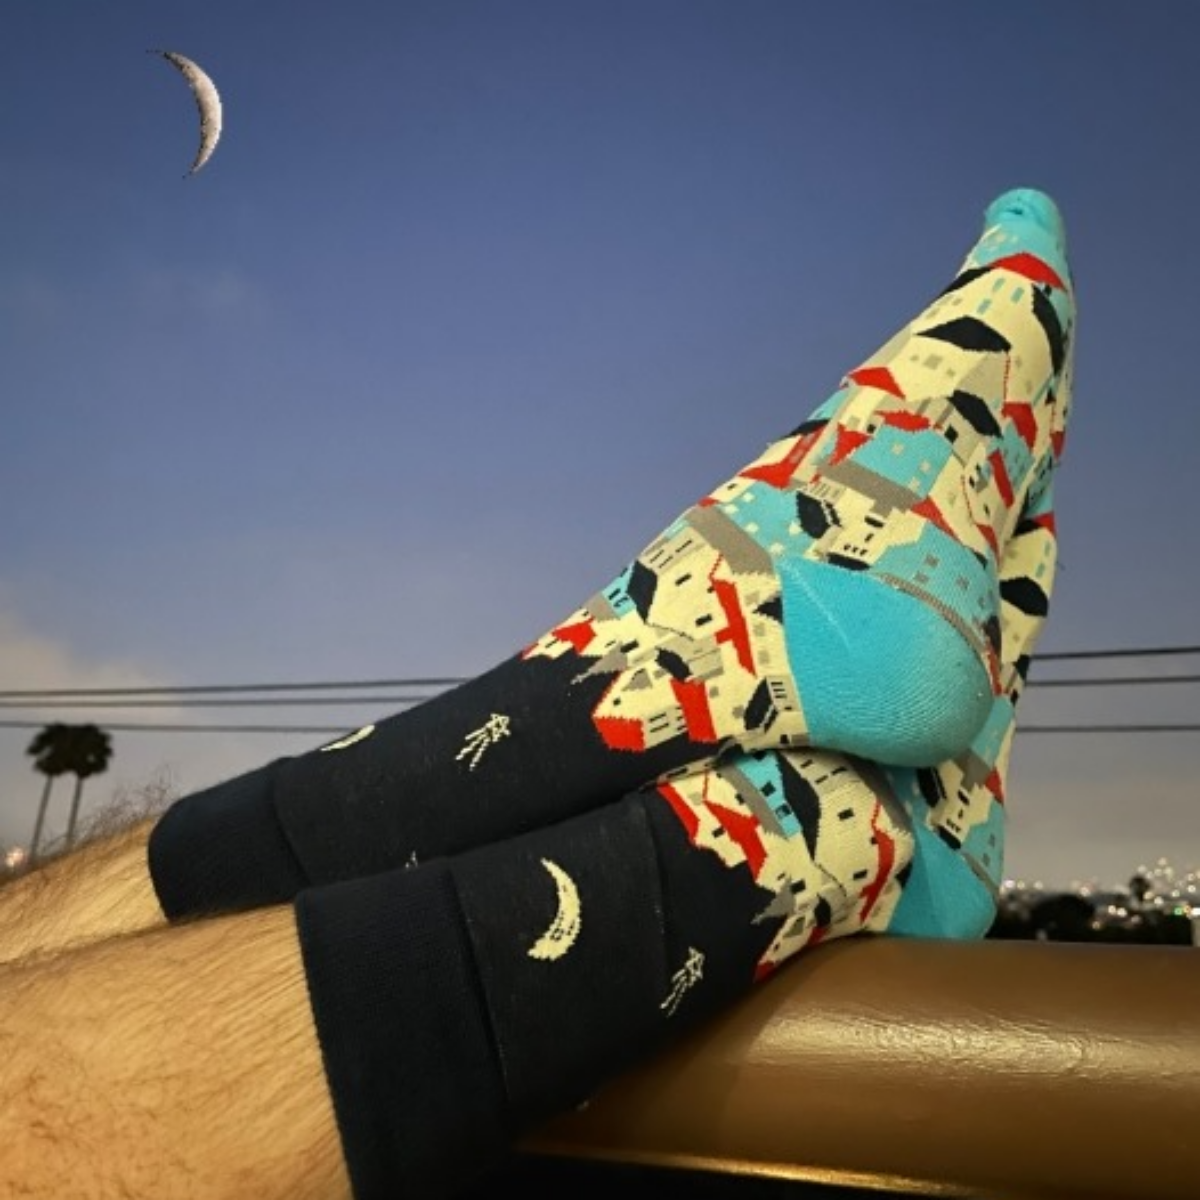 Summer Night and Crescent Moon Over A Seaside Town Socks from the Sock Panda